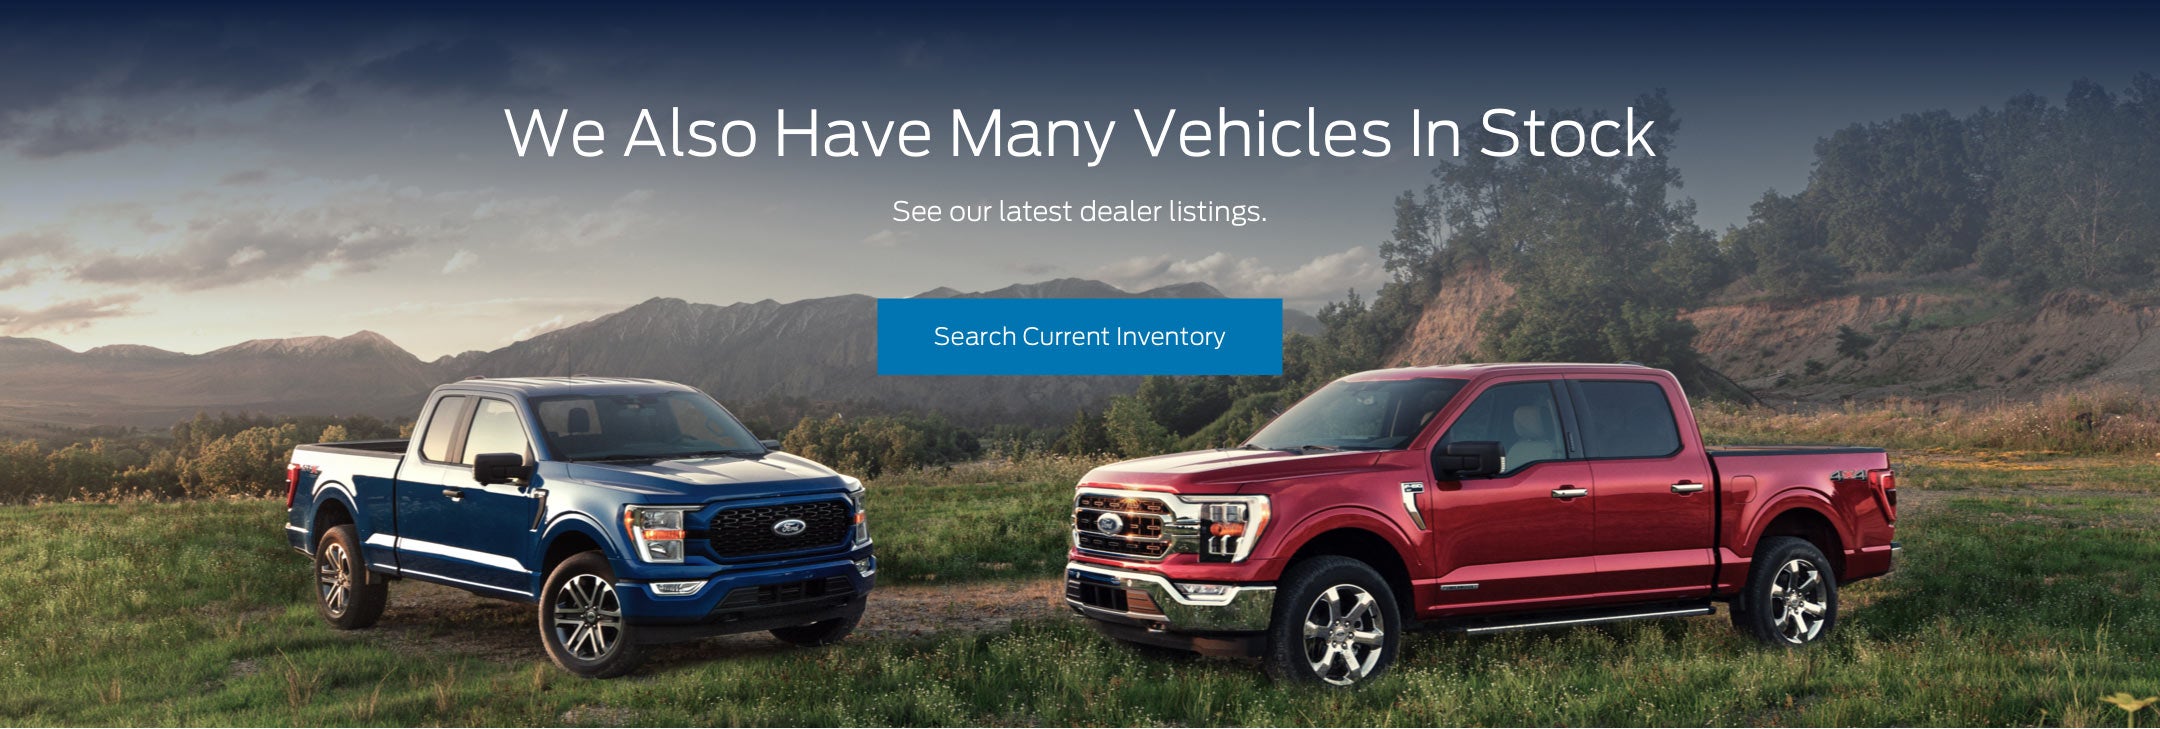 Ford vehicles in stock | Lakeside Ford in Ferriday LA